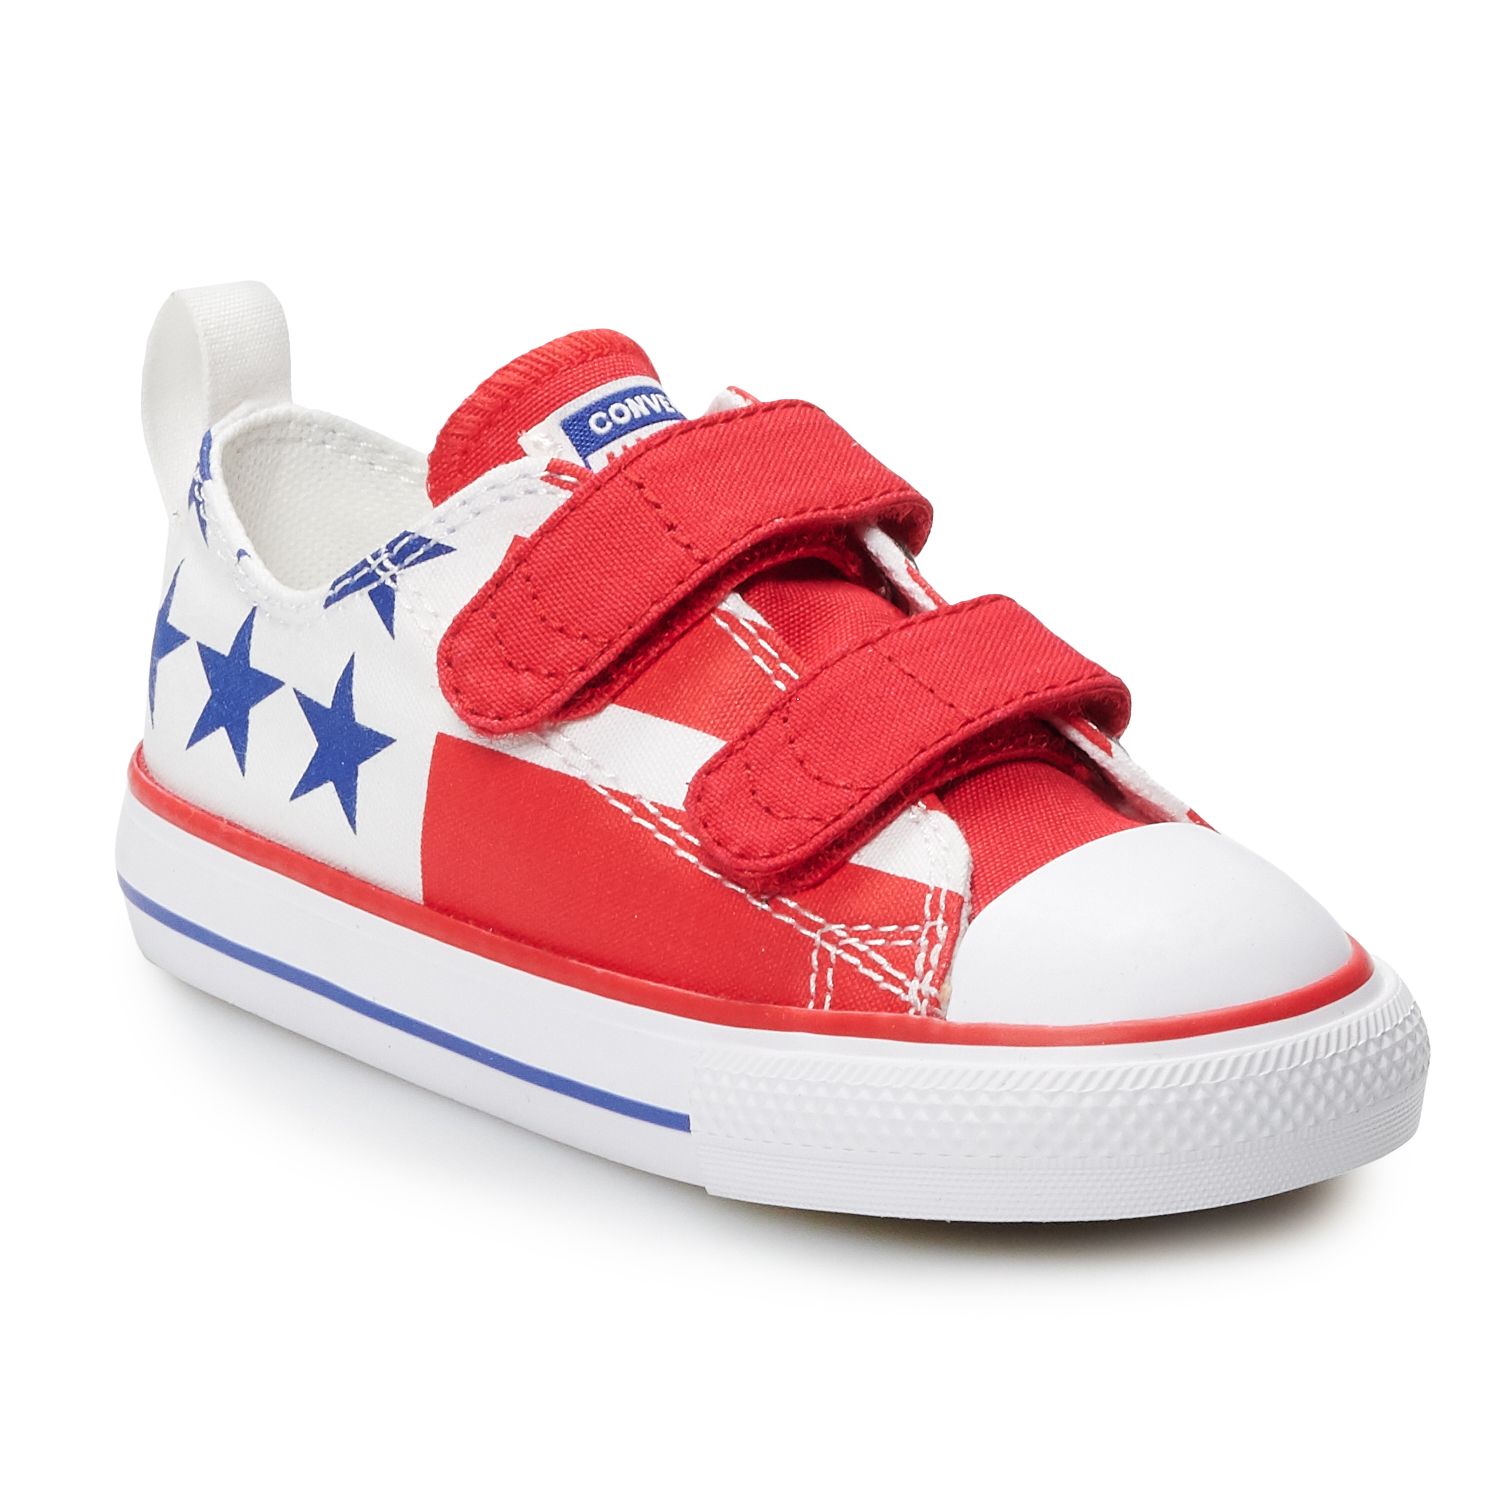 converse all star toddler shoes